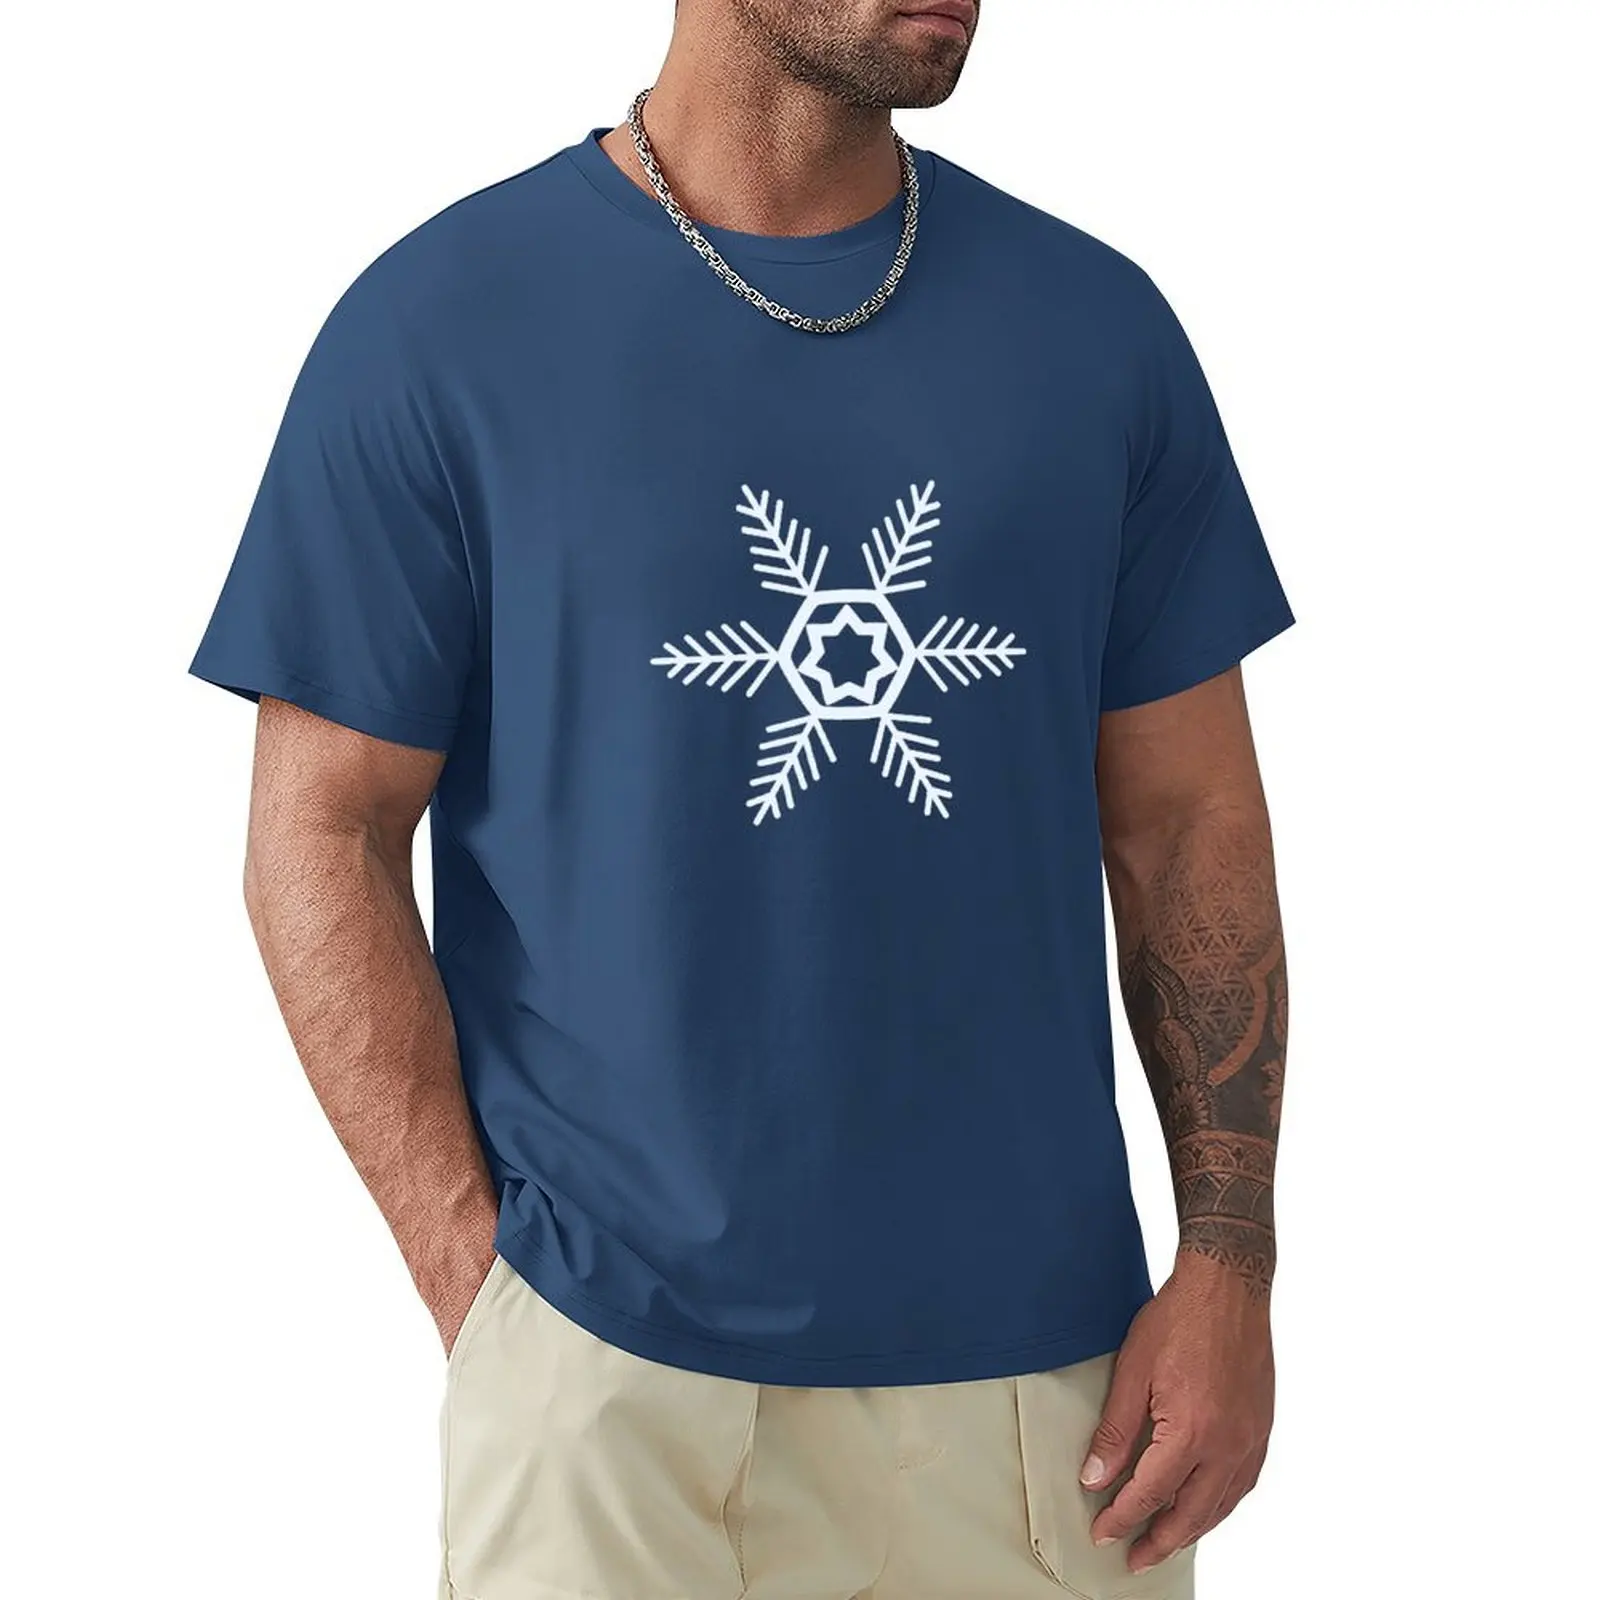 

Pastel Winter Snowflake, Winter Snow Lover T-shirt Short sleeve tee vintage clothes vintage t shirts for men